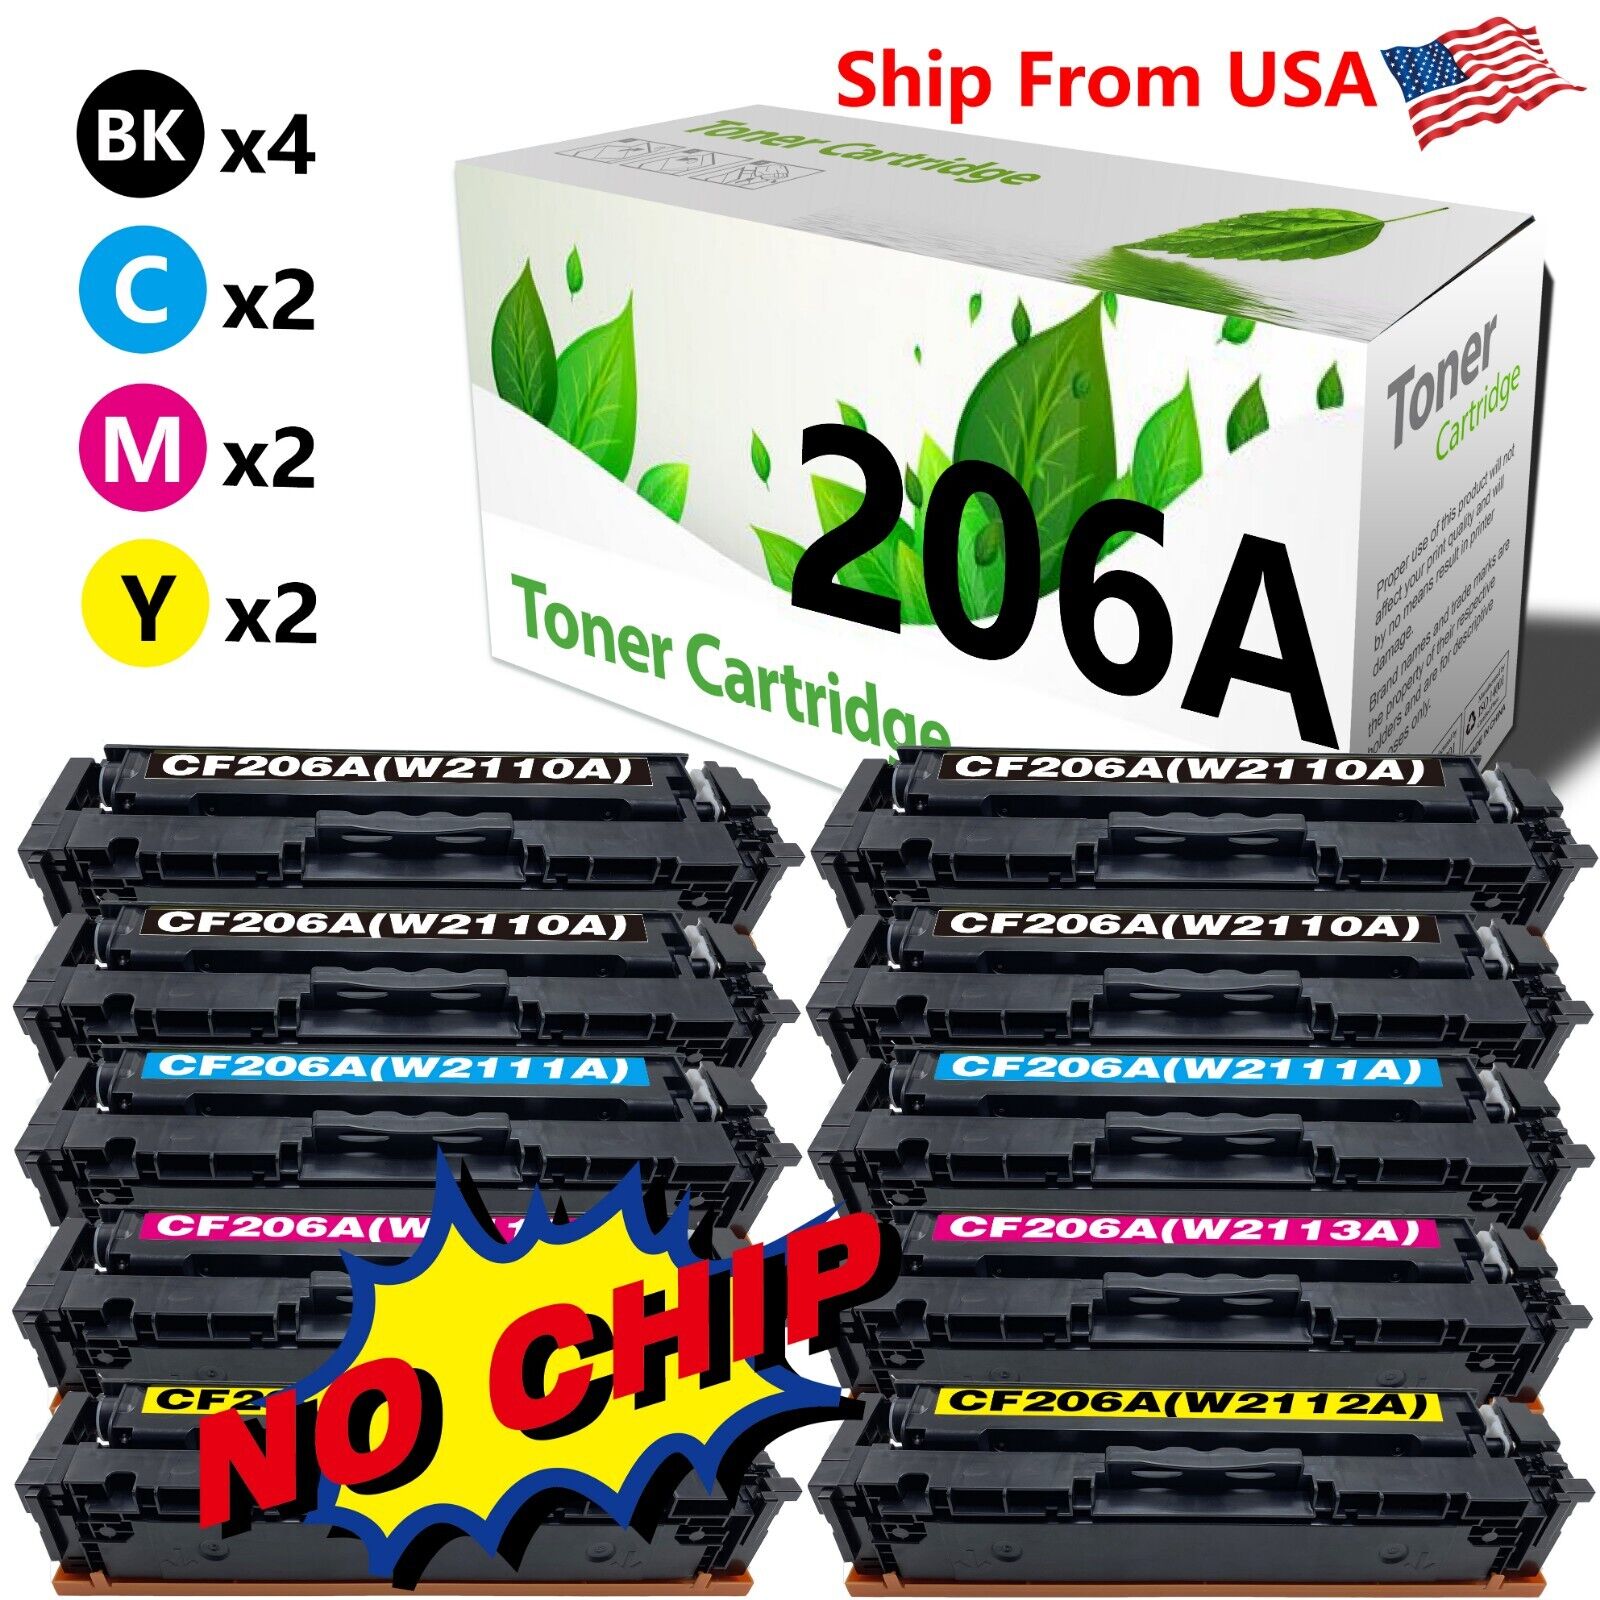 10Pack CF206A Toner Cartridges W2110A-13A no chip for M255nw M283cdw M283fdw